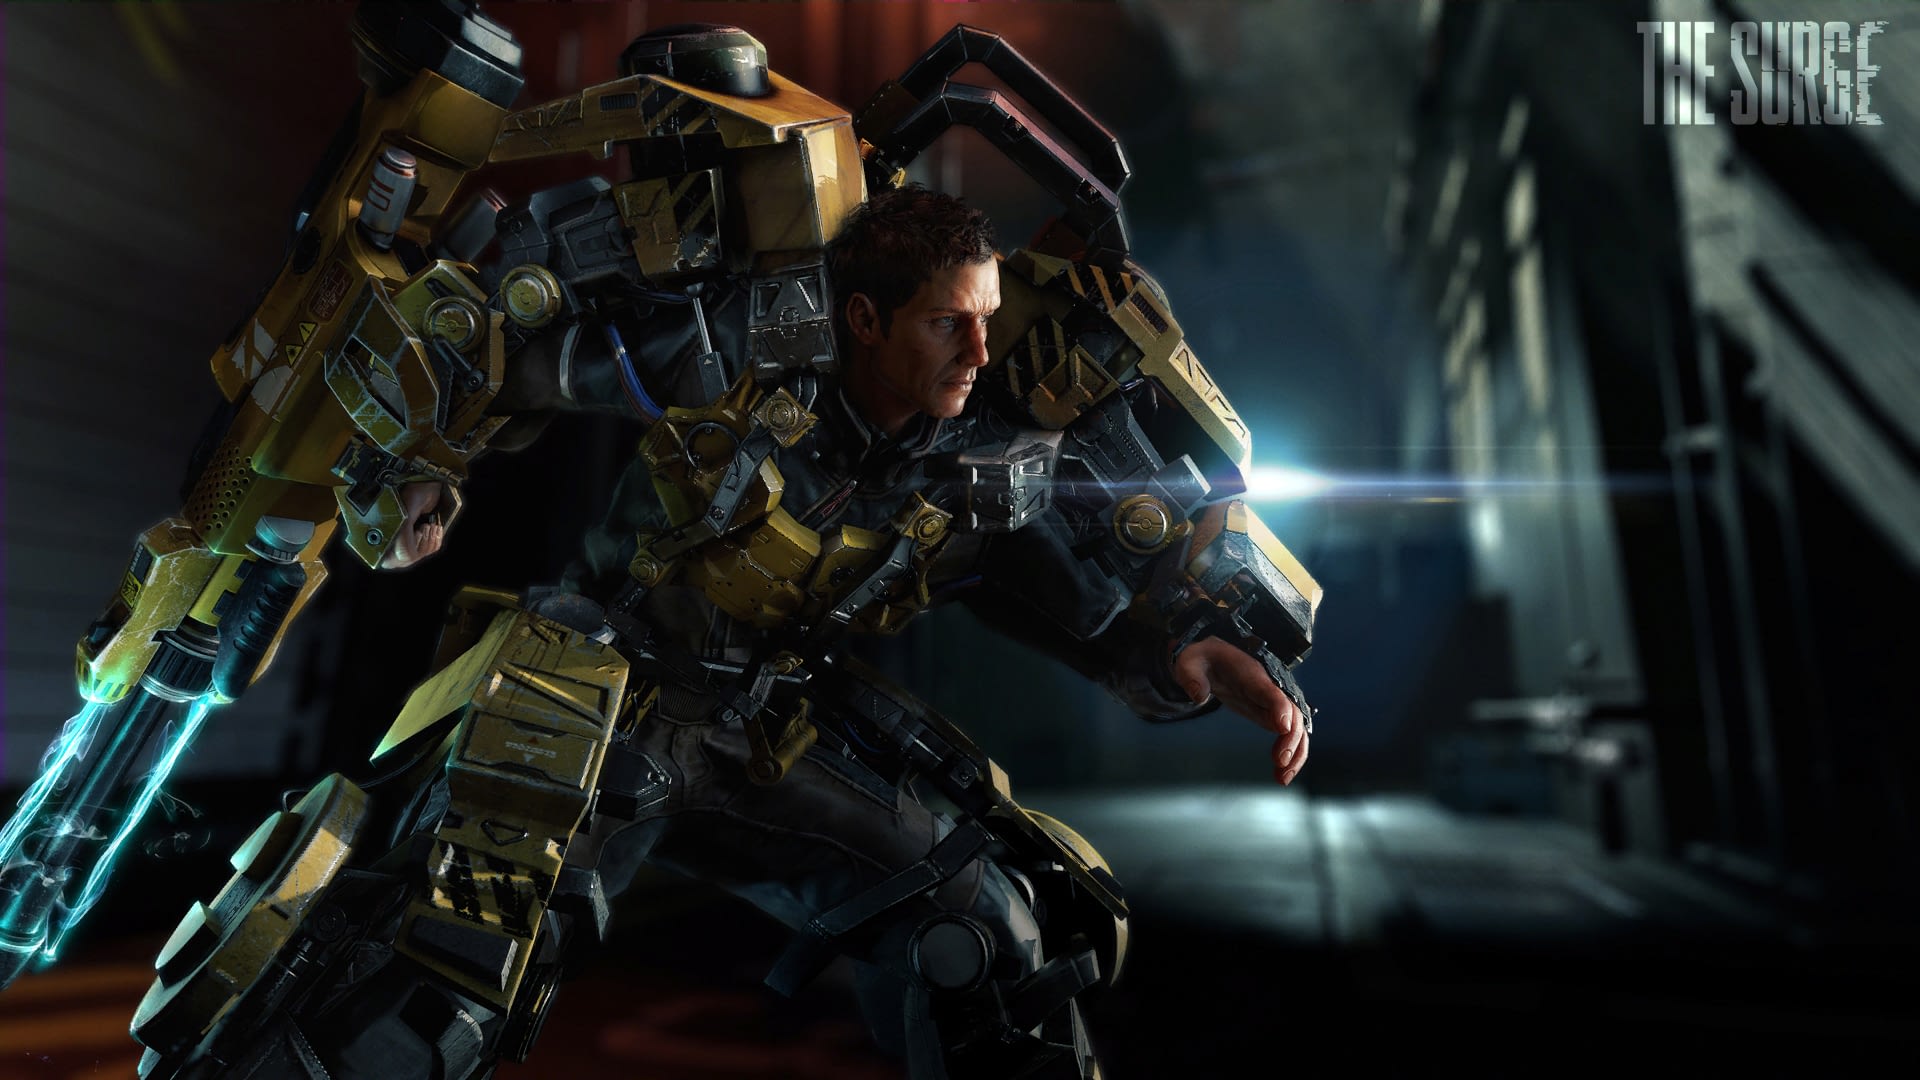 Sci Fi Action RPG, The Surge Gets New Screenshots Showcasing Beefy Mechs And Exo Suits